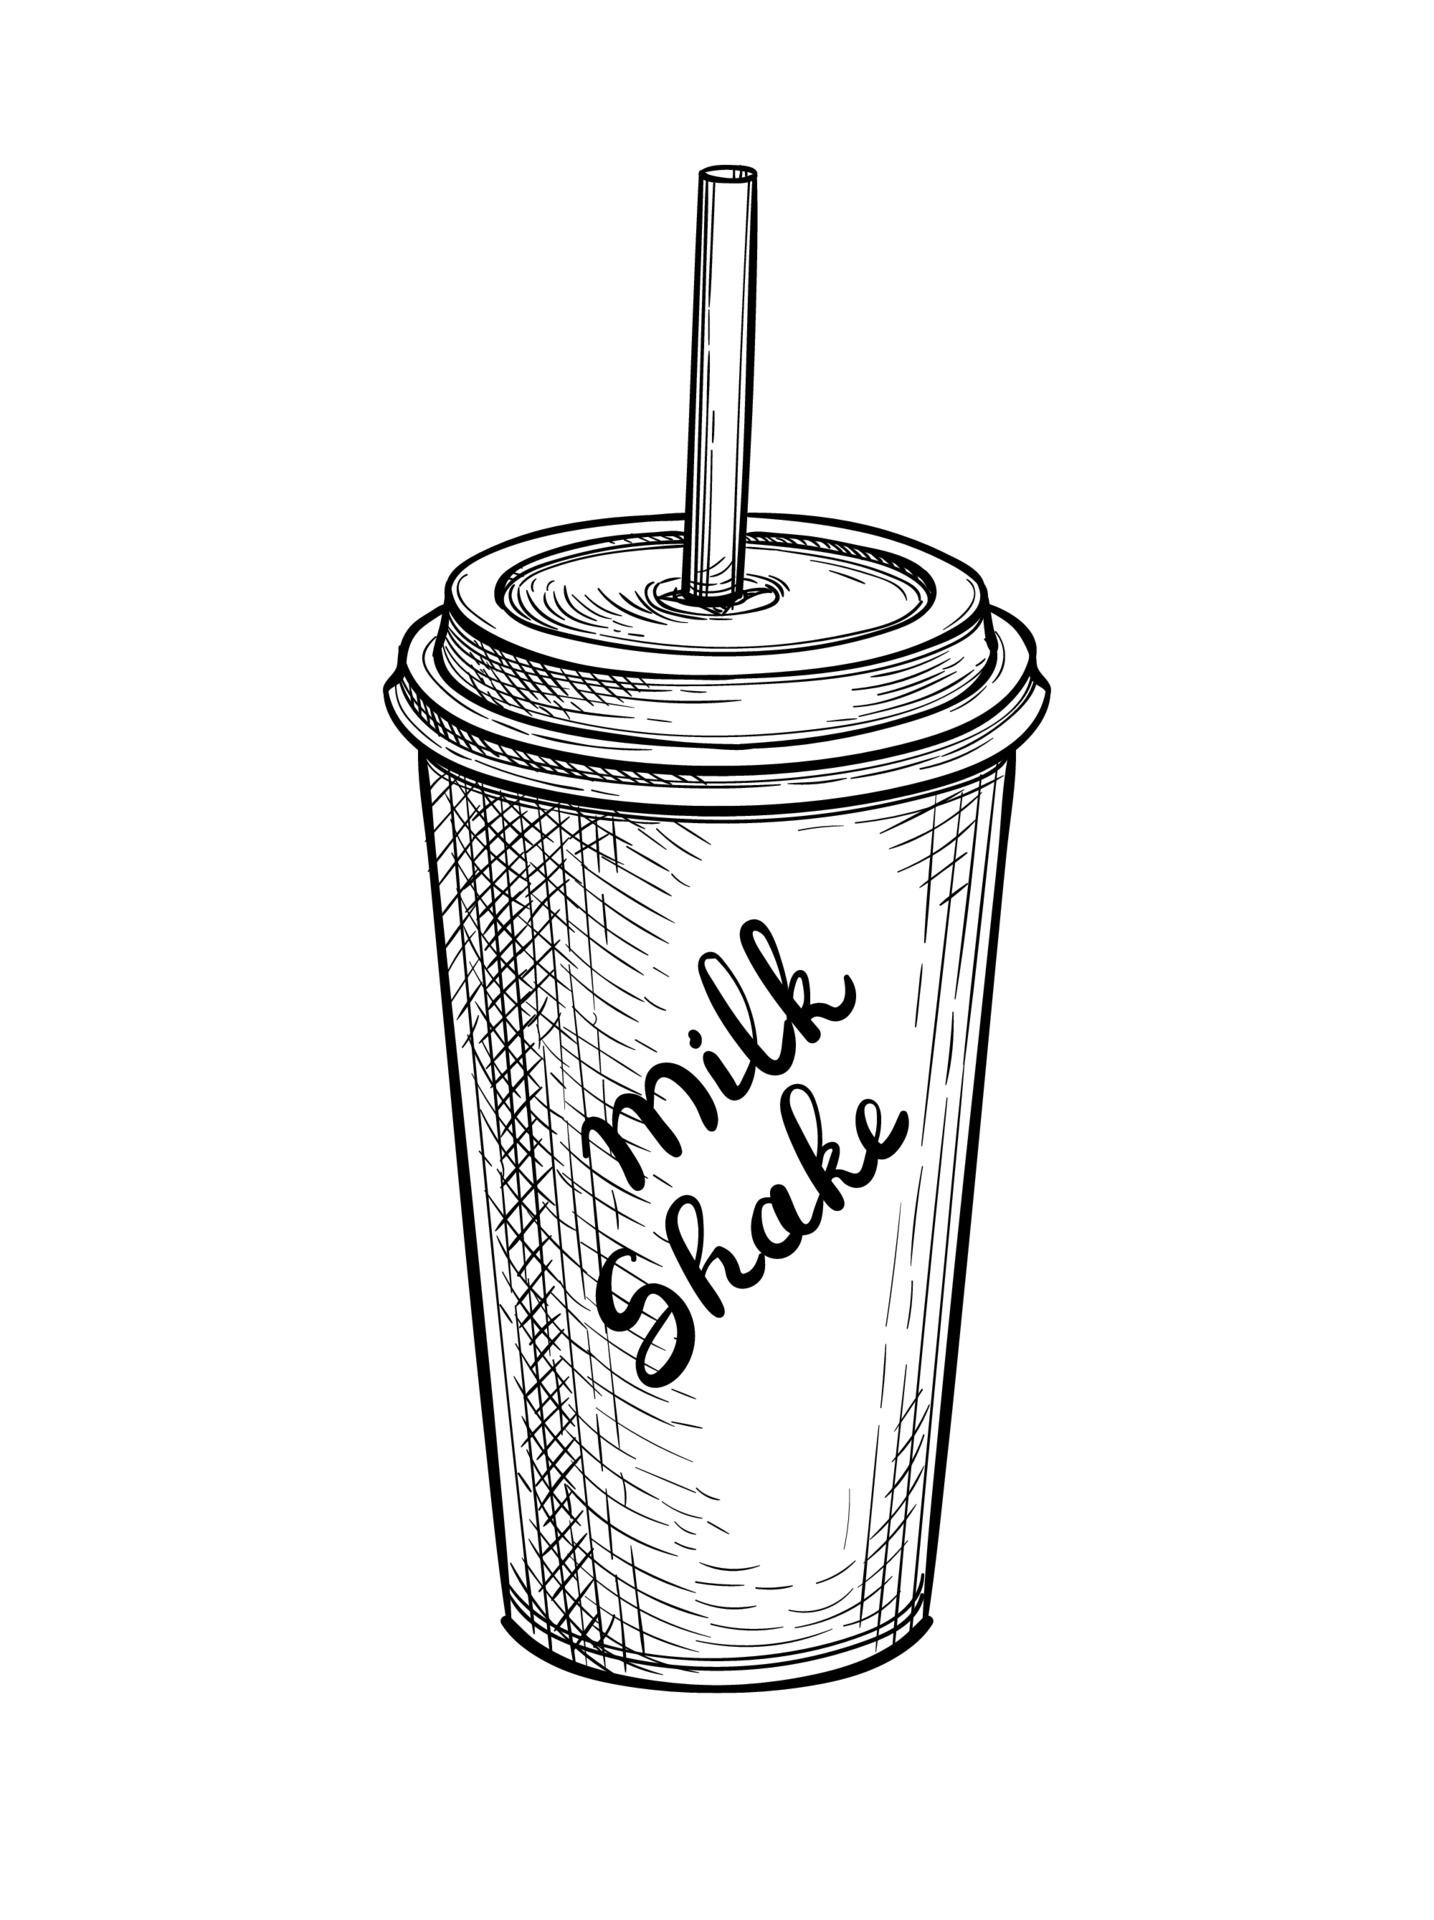 https://static.vecteezy.com/system/resources/previews/020/271/898/original/milkshake-in-paper-or-plastic-cup-with-lid-and-drinking-straw-ink-sketch-isolated-on-white-background-hand-drawn-text-illustration-retro-style-vector.jpg